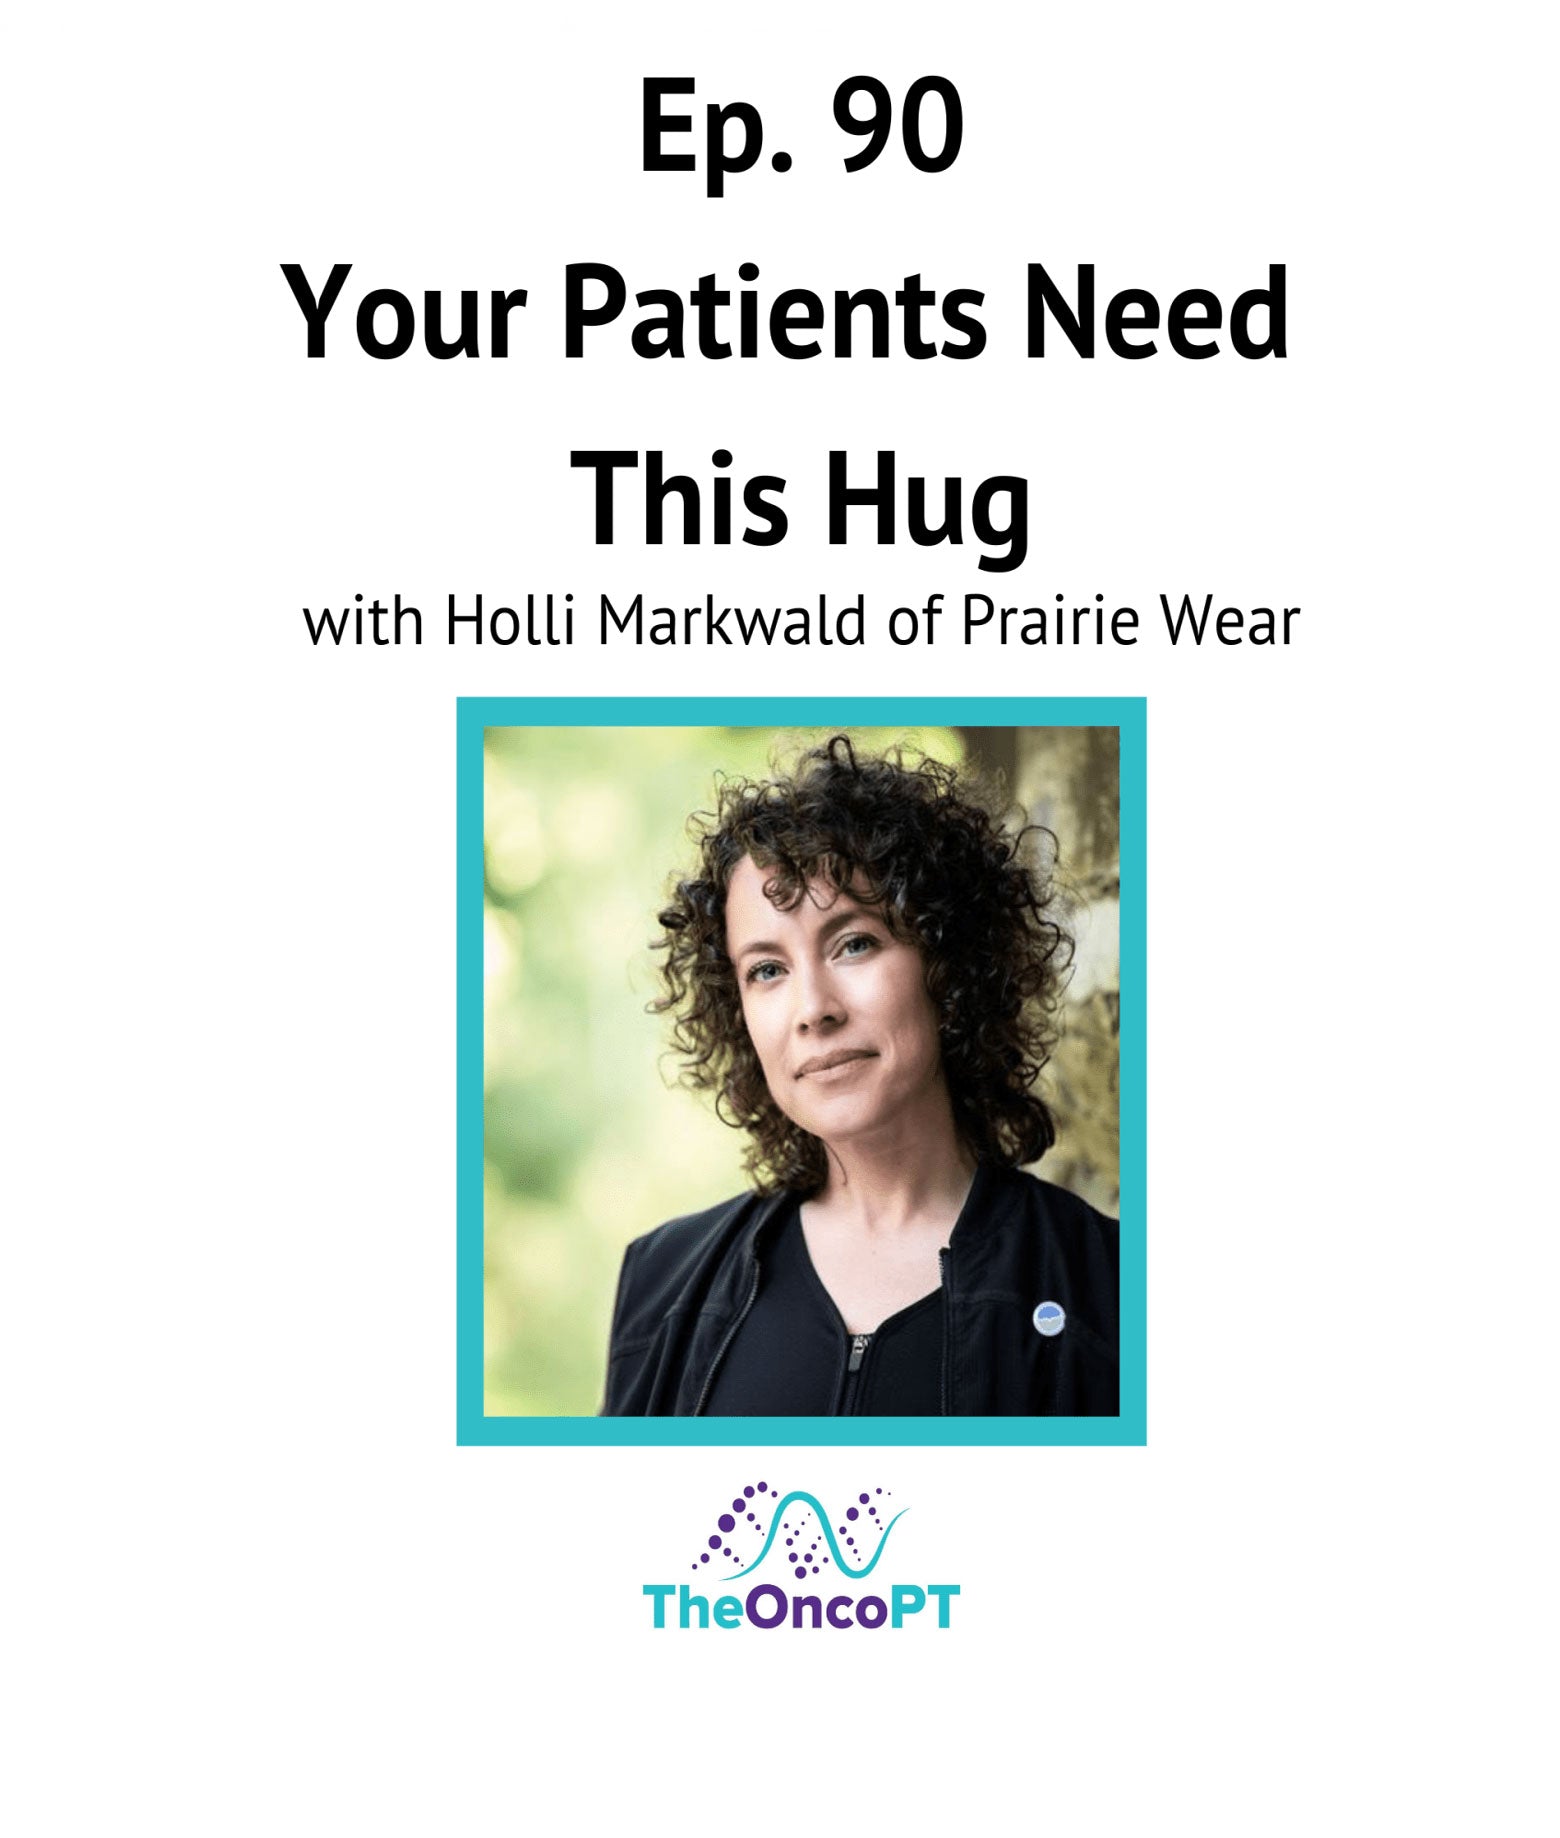 Your Patients Need This Hug - Ep. 90, Podcast